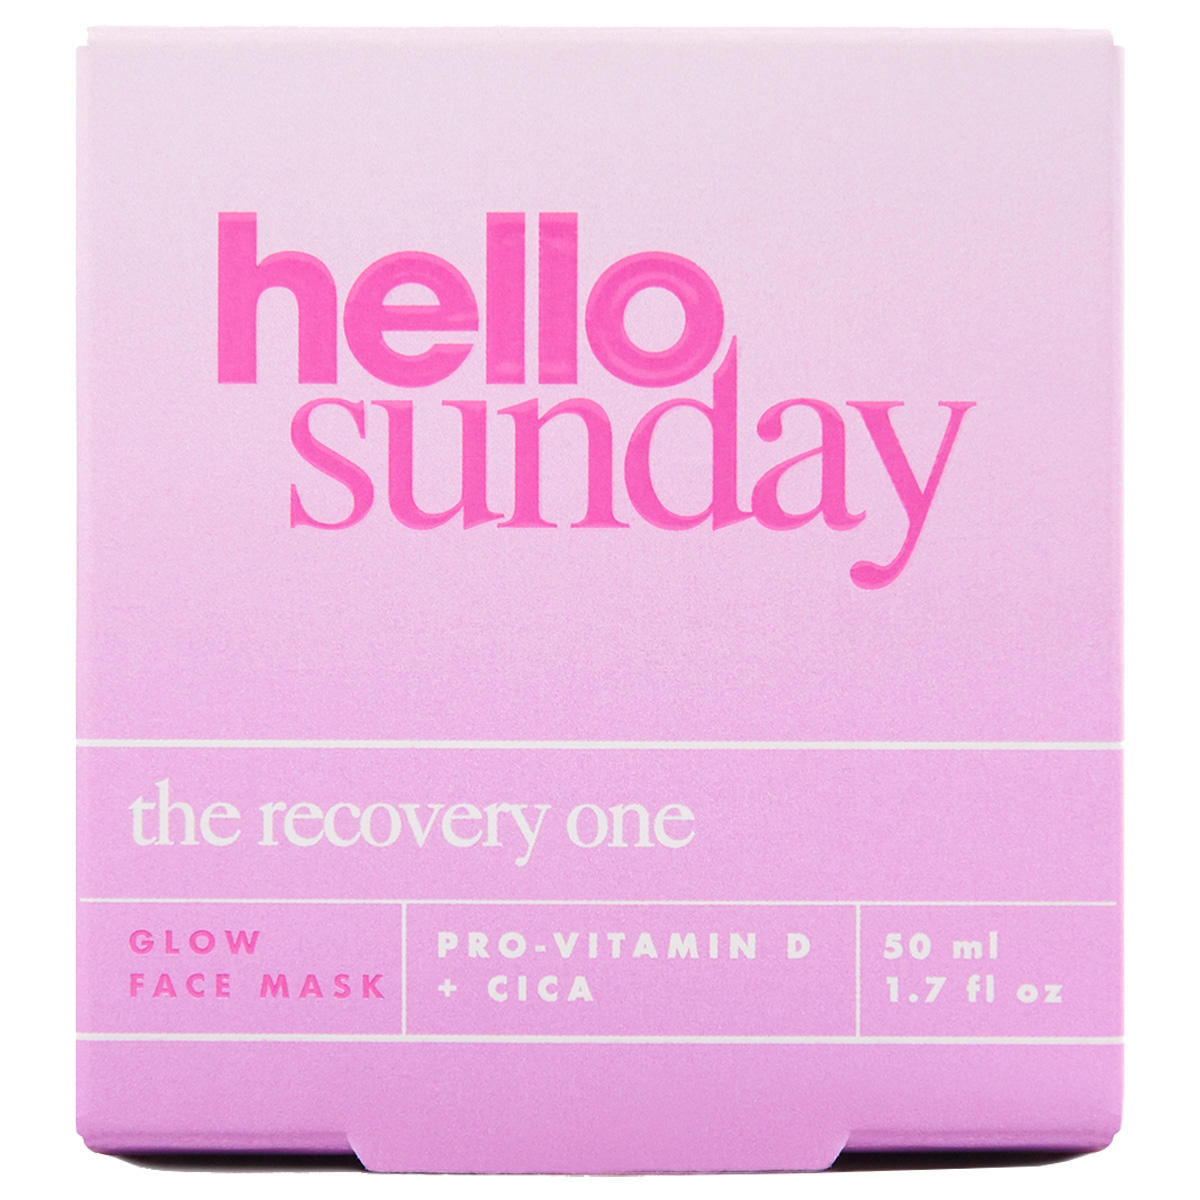 hello sunday the recovery one Glow face mask 50 ml - 4